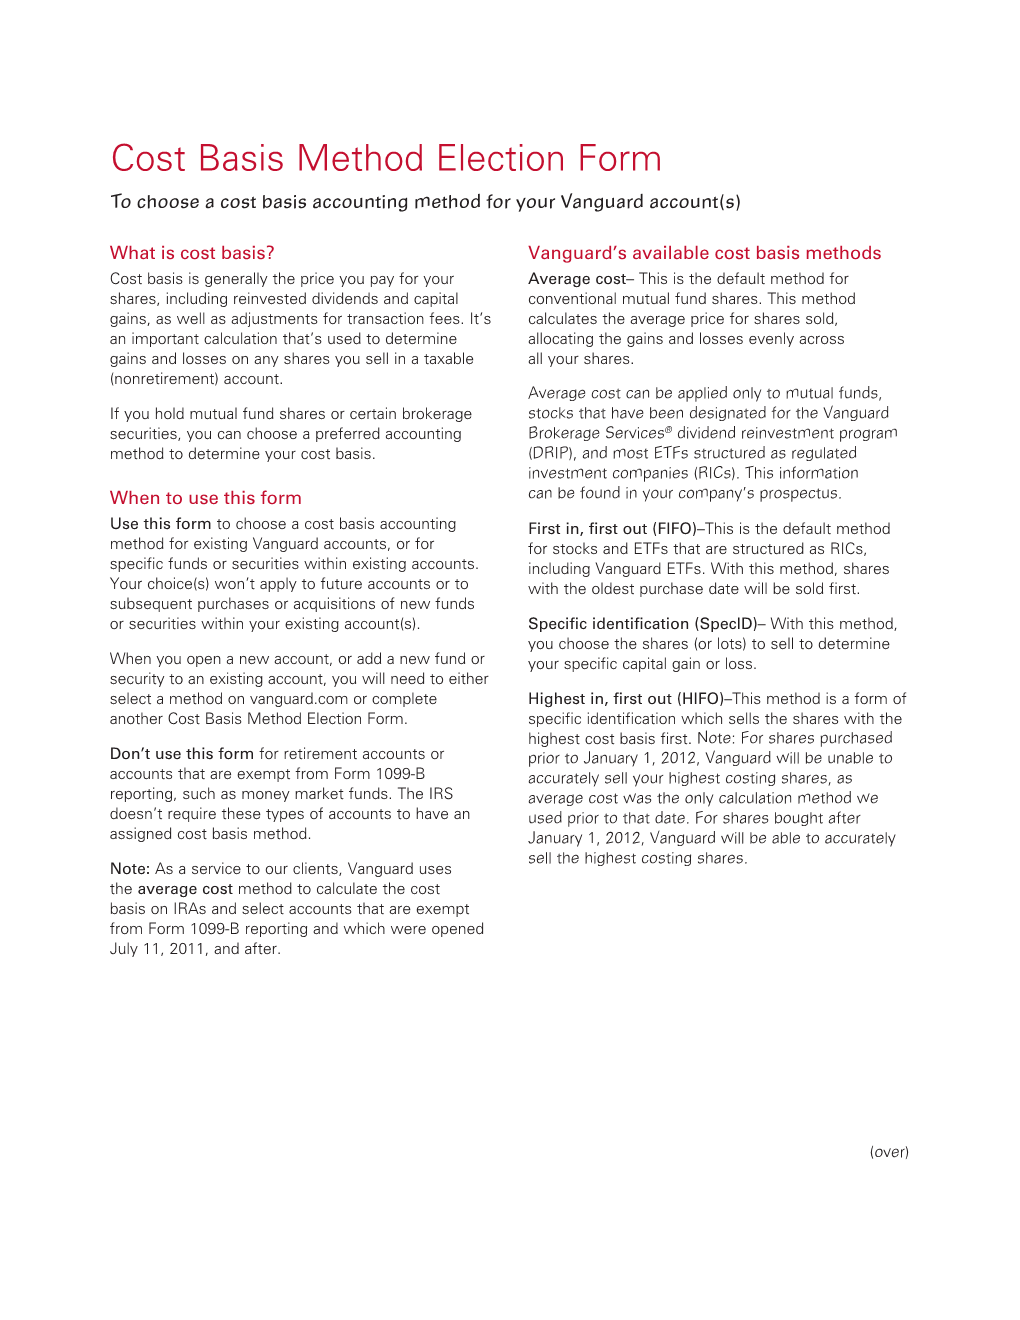 Cost Basis Method Election Form to Choose a Cost Basis Accounting Method for Your Vanguard Account(S)